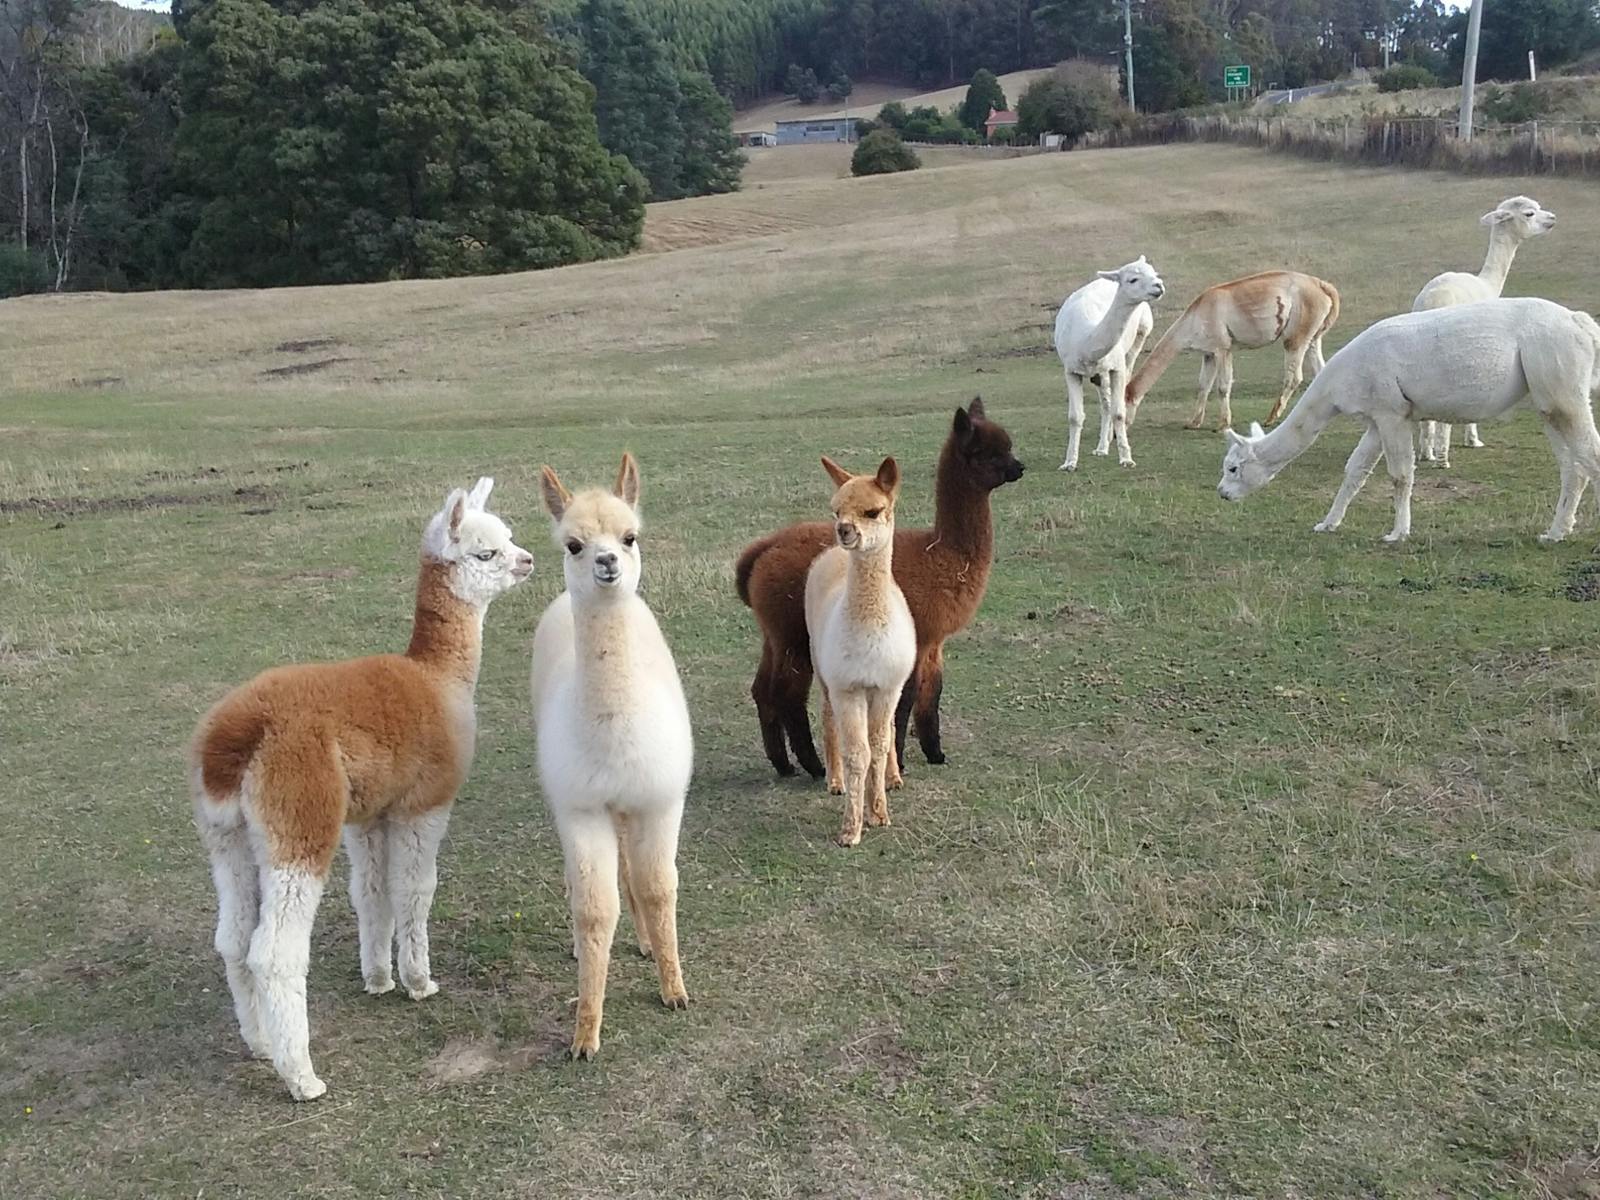 Group of four baby alpacas, white, dark brown, and tan in the paddock with the herd.